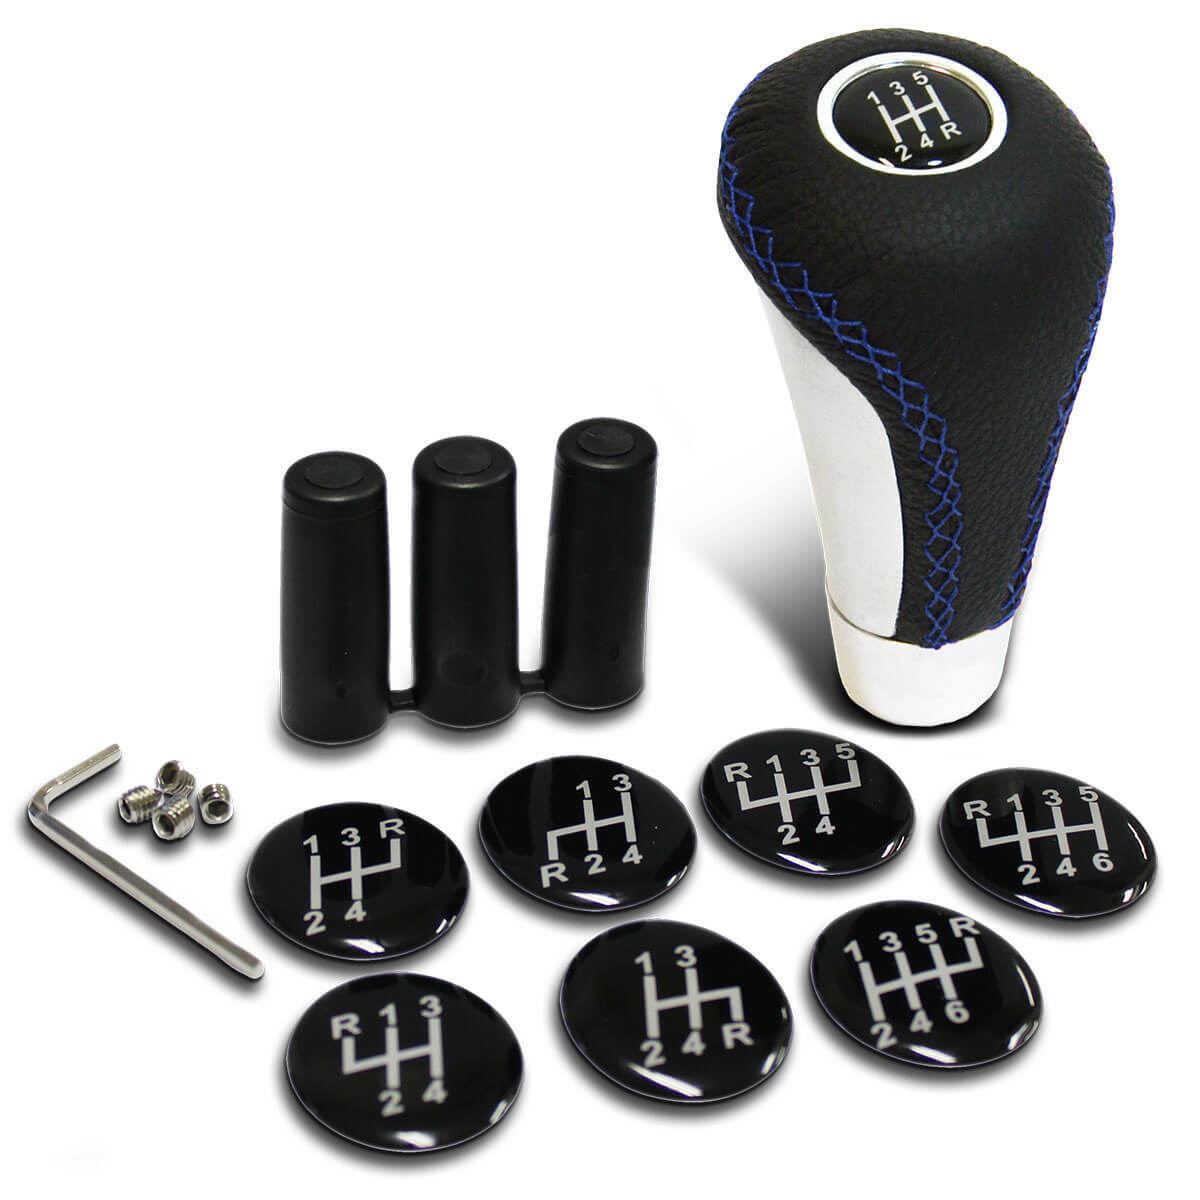 Leather Gear Knob Blue Stitched Aluminium Insert With 8 Shift Patterns